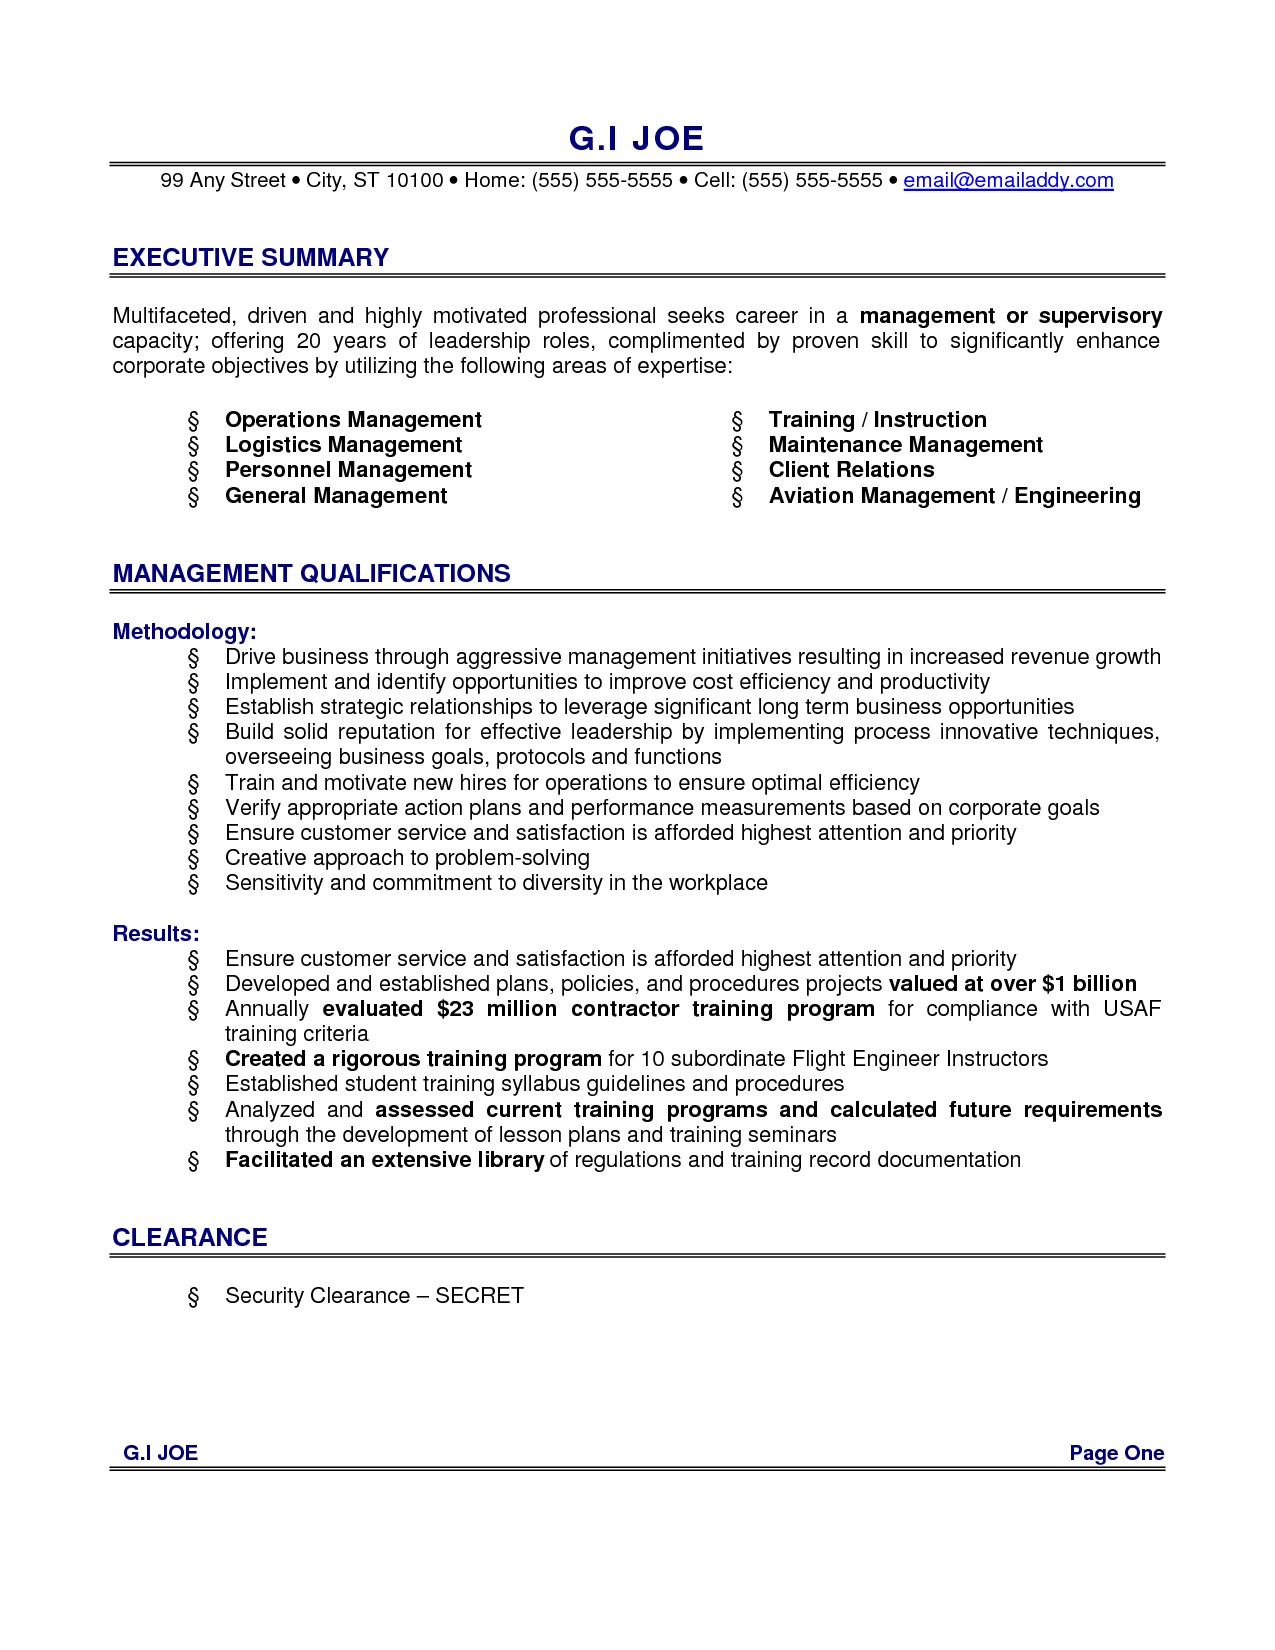 Resume Examples For Executive Summary With Management Qualifications Document Sample